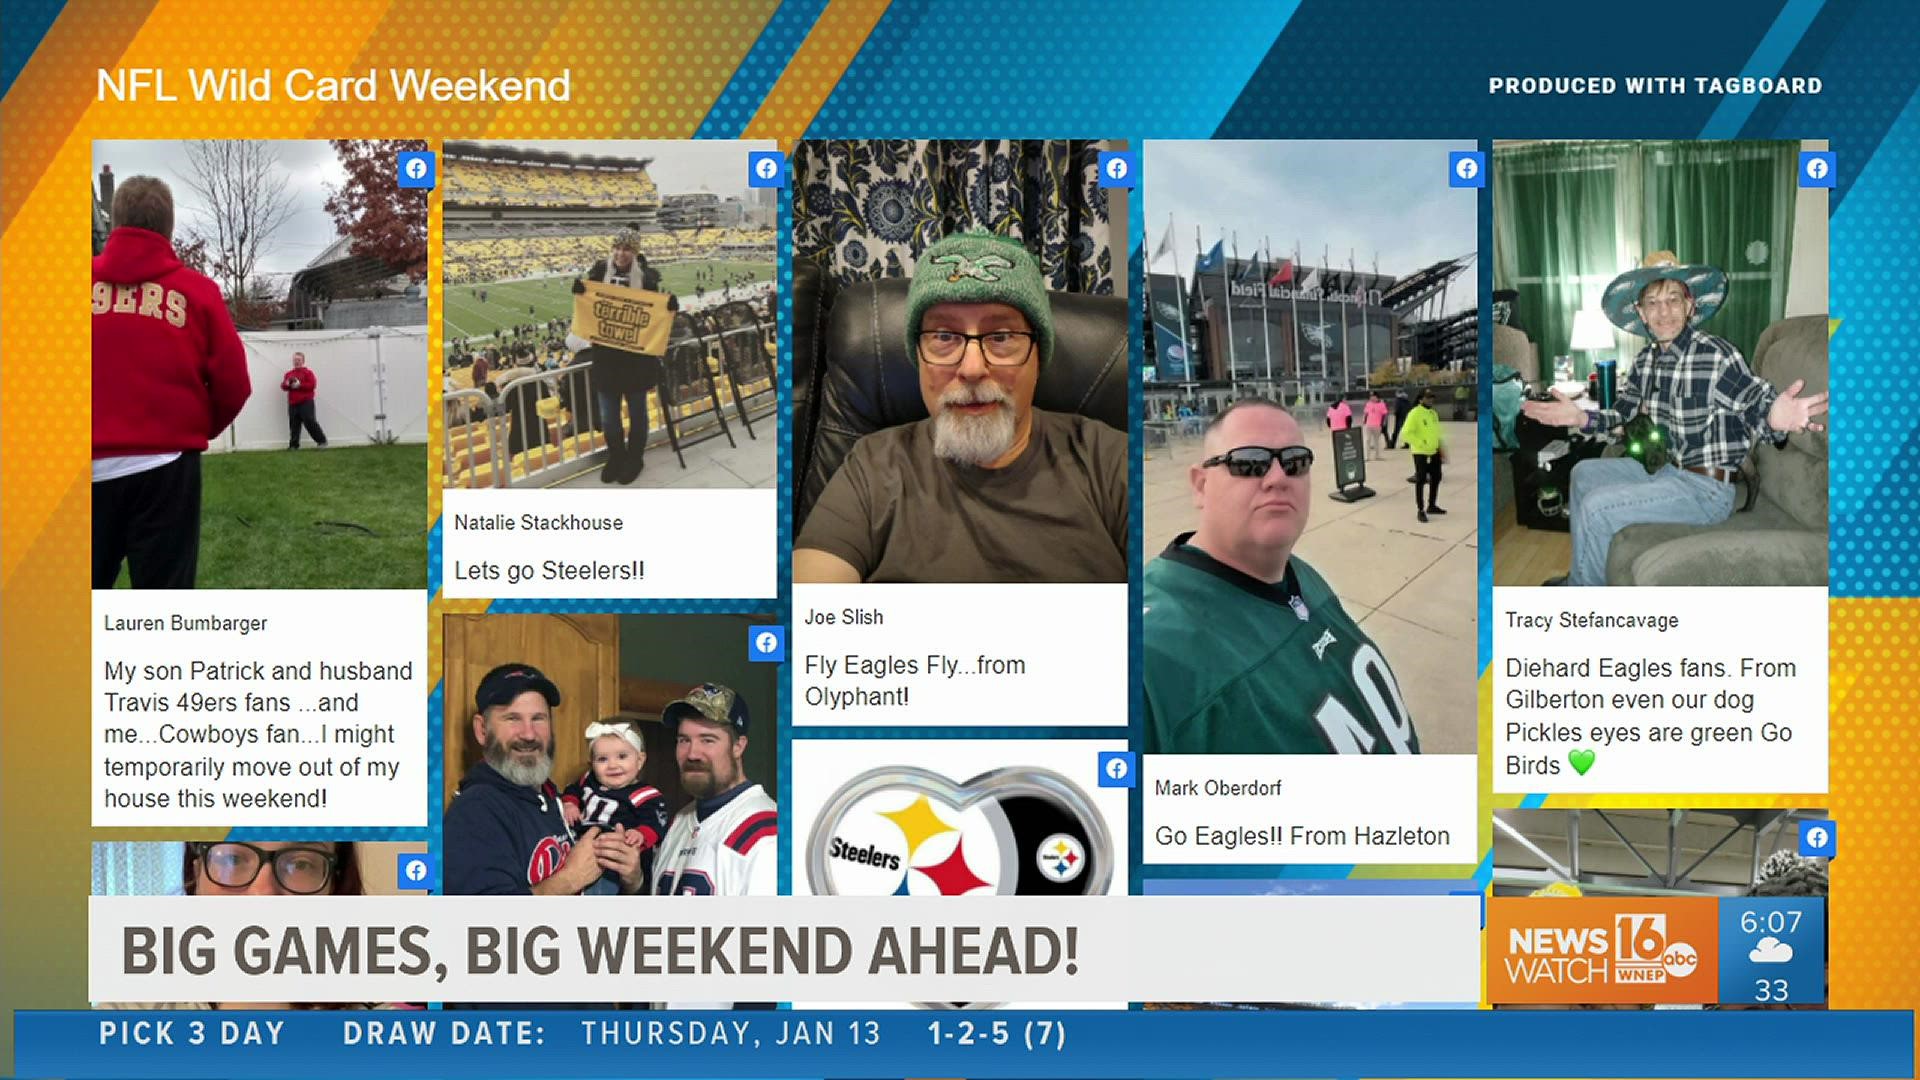 12 teams will face off this Super Wild Card Weekend for a chance to make it to the Divisional round. Here's a look at which NFL team WNEP viewers are rooting for.